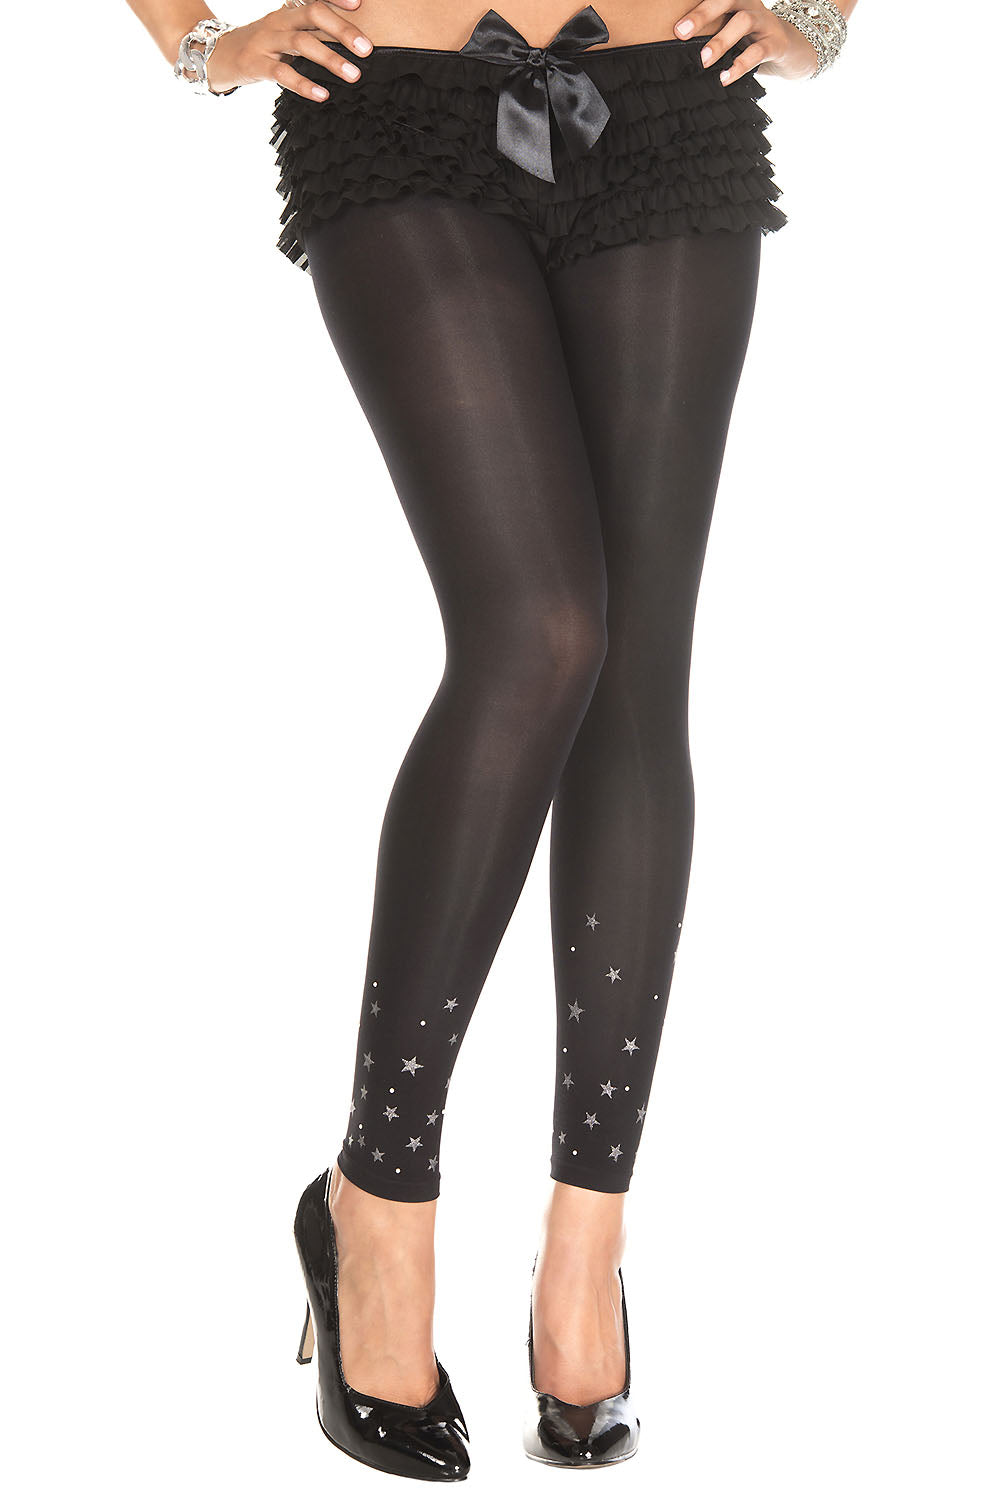 Music Legs 35010 Star Print Leggings - Black opaque footless tights with a silver star and white pearl style dots print around the bottom half of the legs.